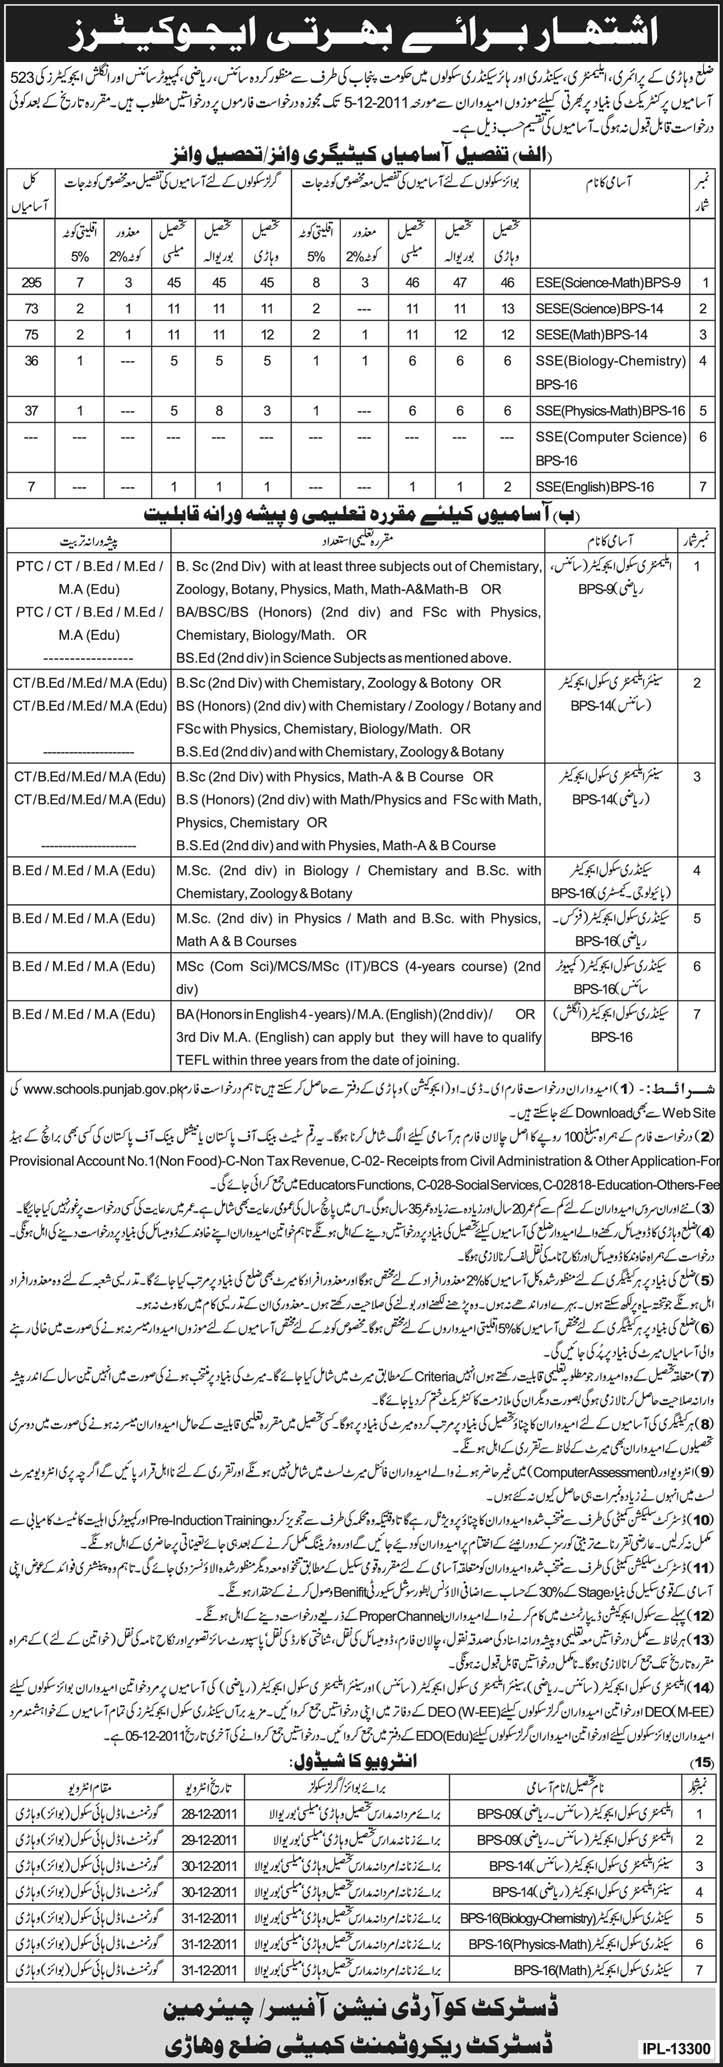 Educators Required by Government of the Punjab, for Vehari District